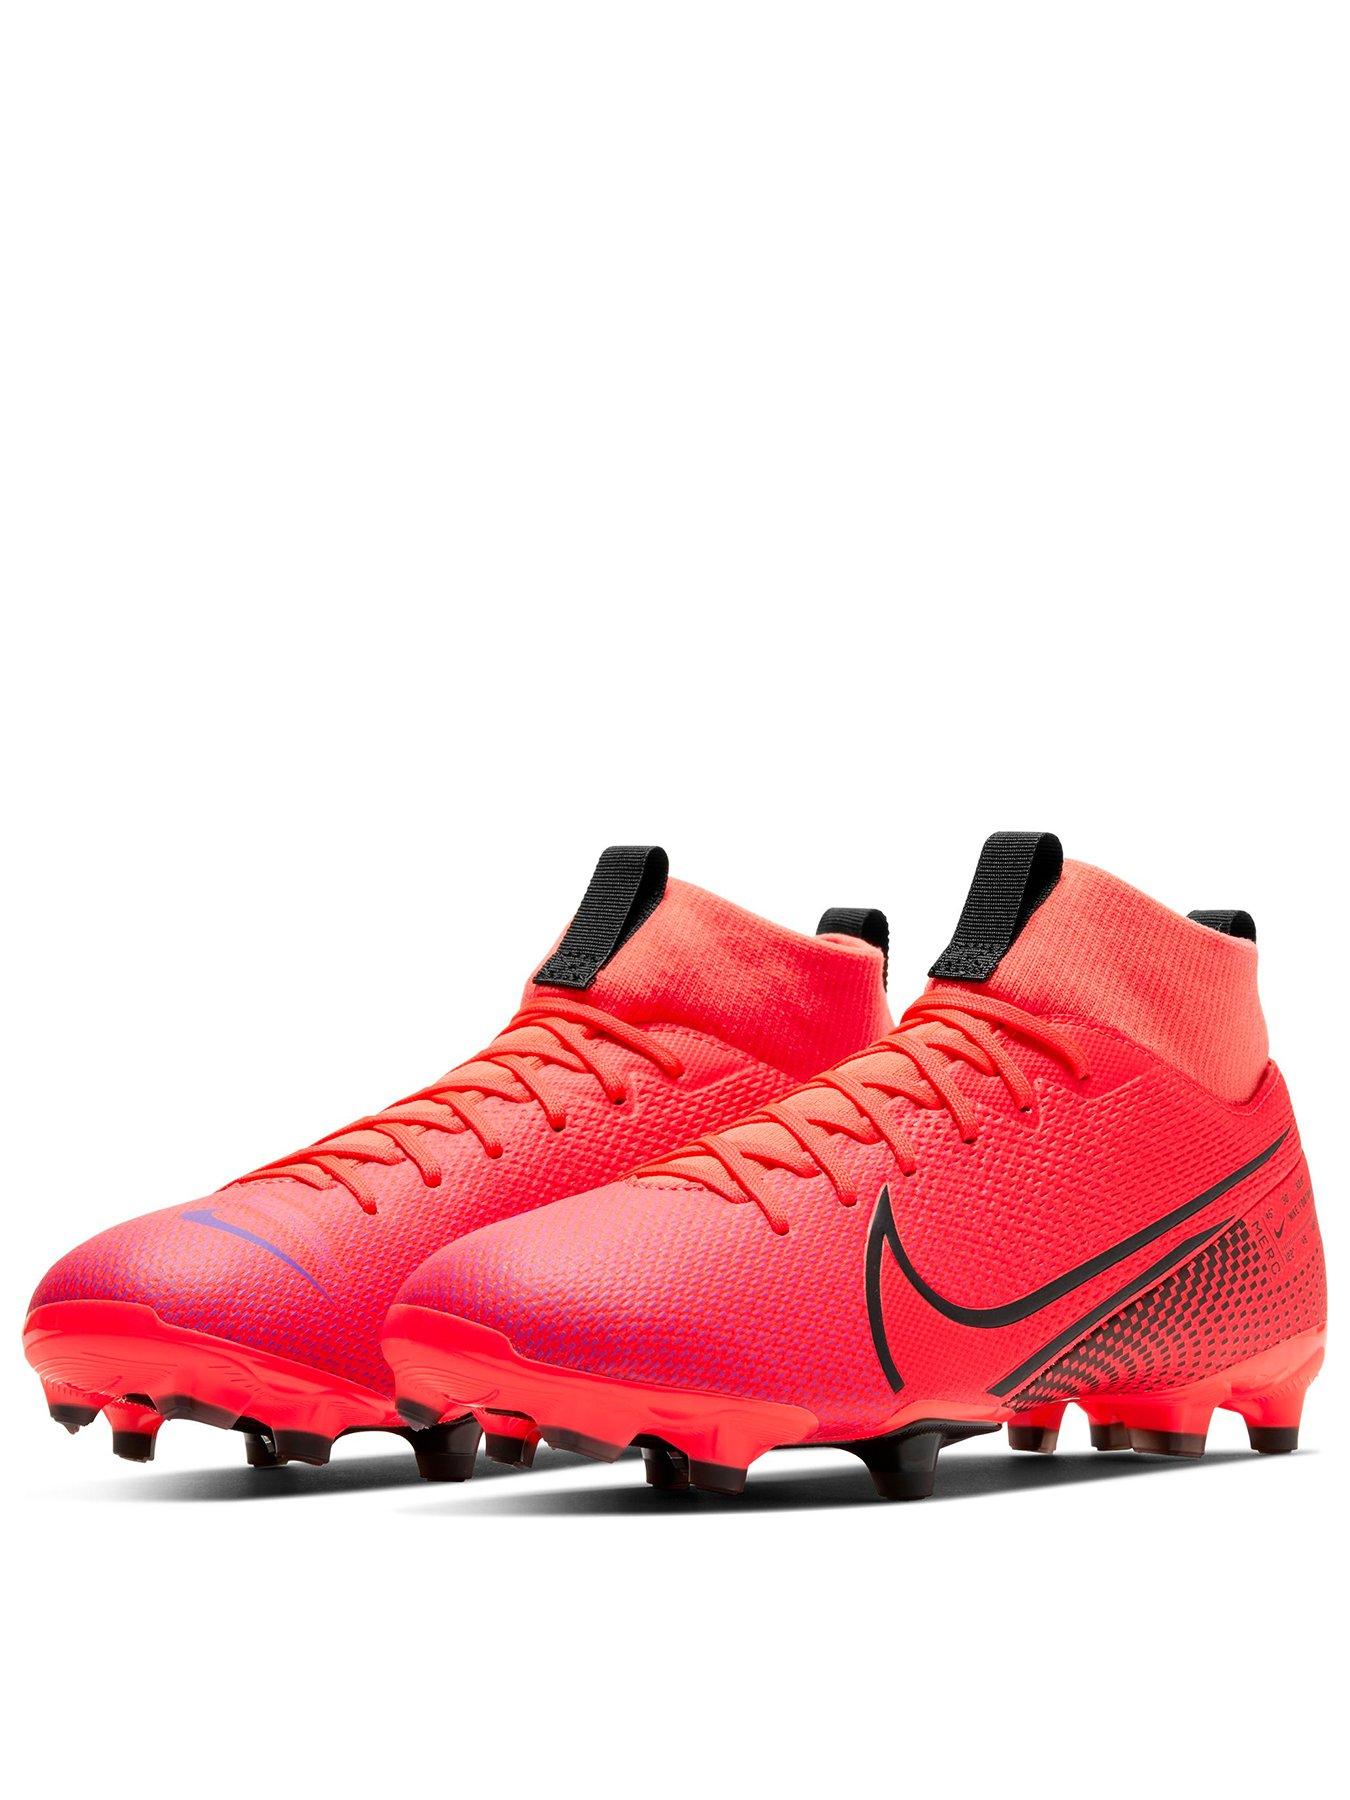 Nike Mercurial Superfly 6 Just Do It Pack YouTube